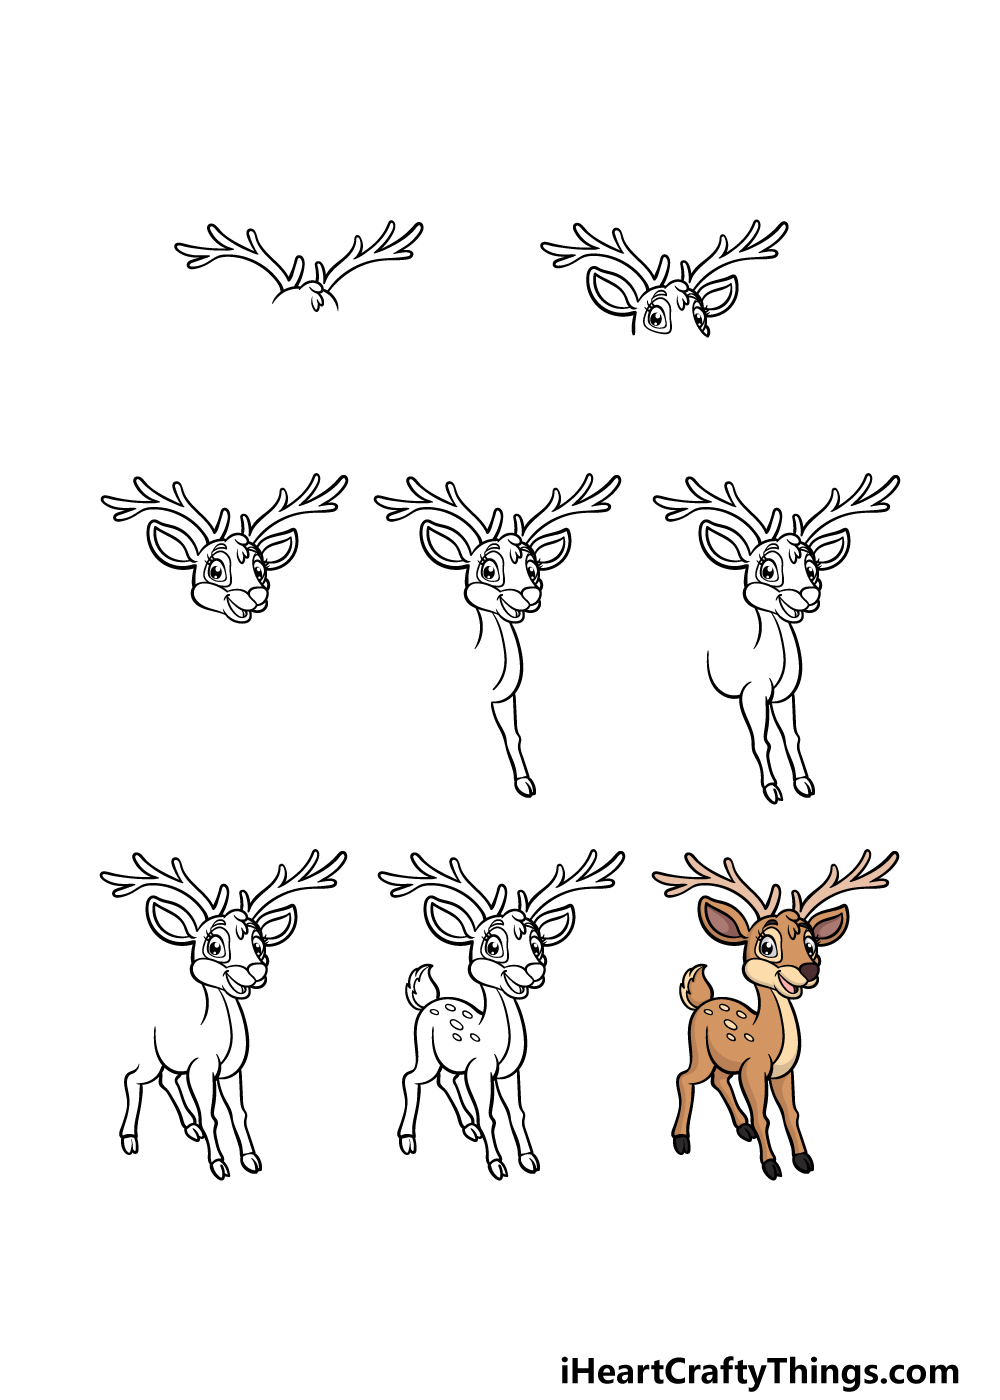 how to draw a cartoon deer in 8 steps